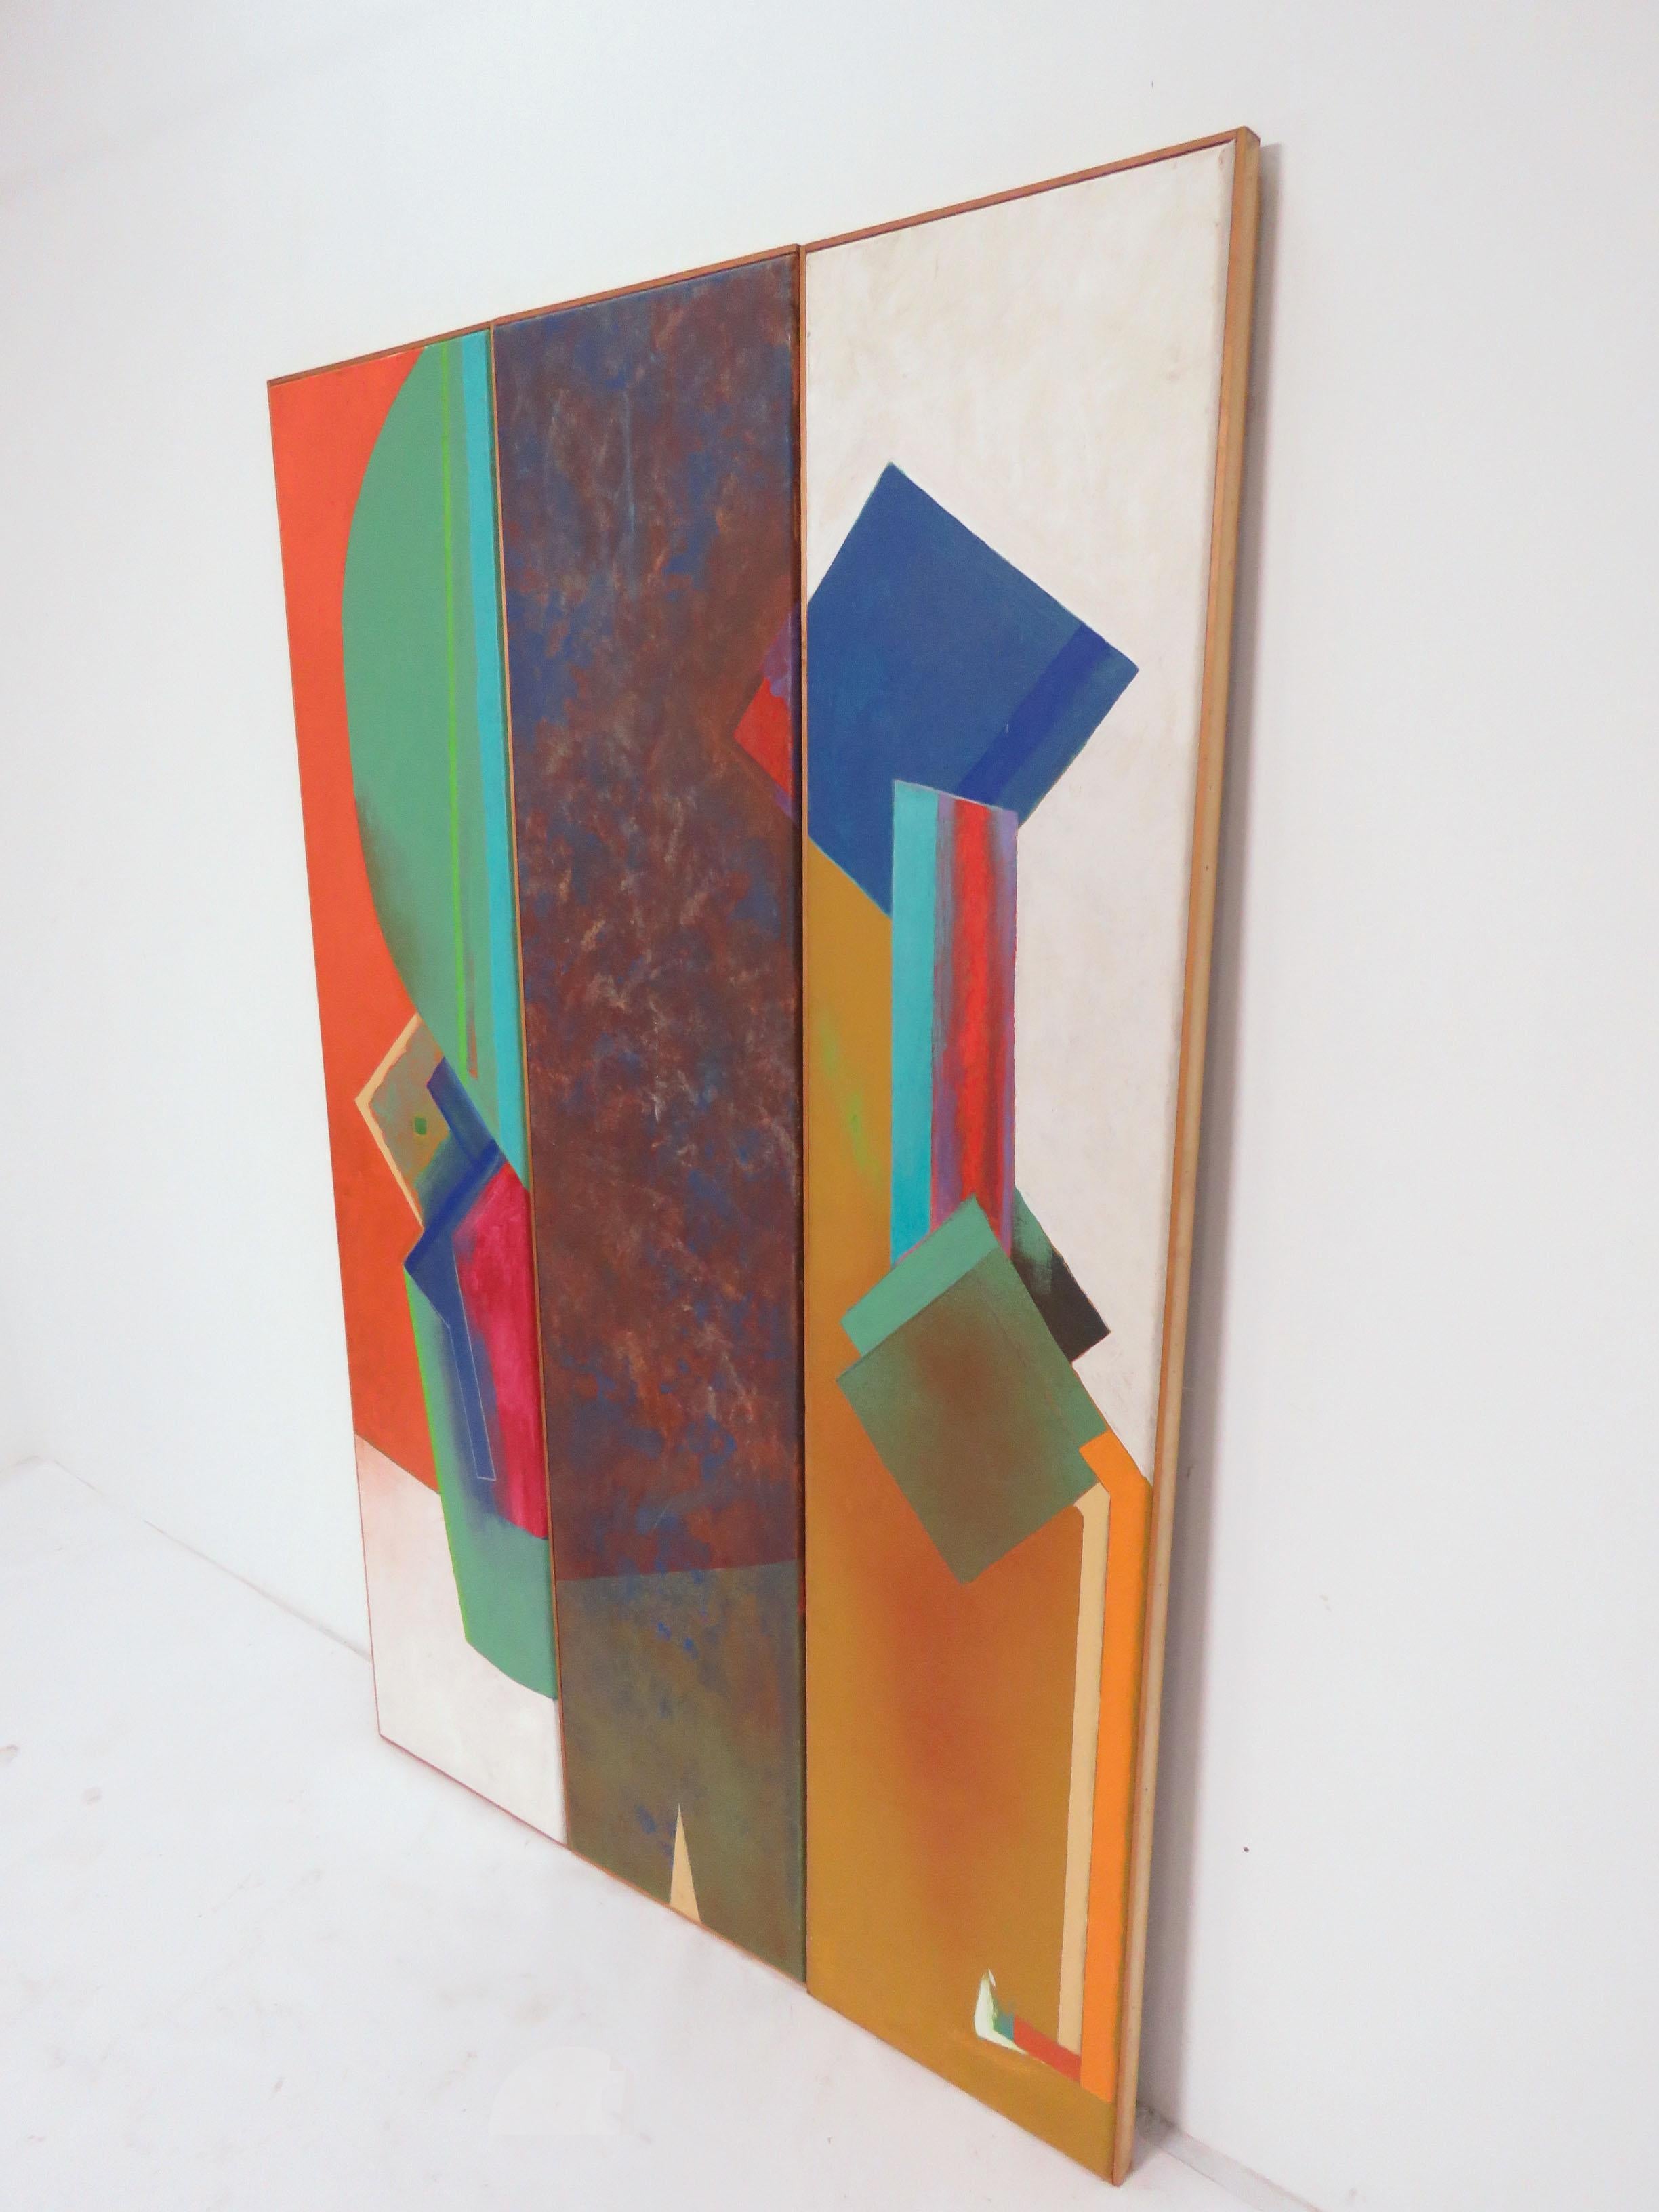 A triptych of six foot high (x 15” wide) panels, hard edge oils on canvas by the important New England abstract artist Jack Wolfe, circa 1960s. While a grad student at the School of the Museum of Fine Arts during the 1950s he became a leading member